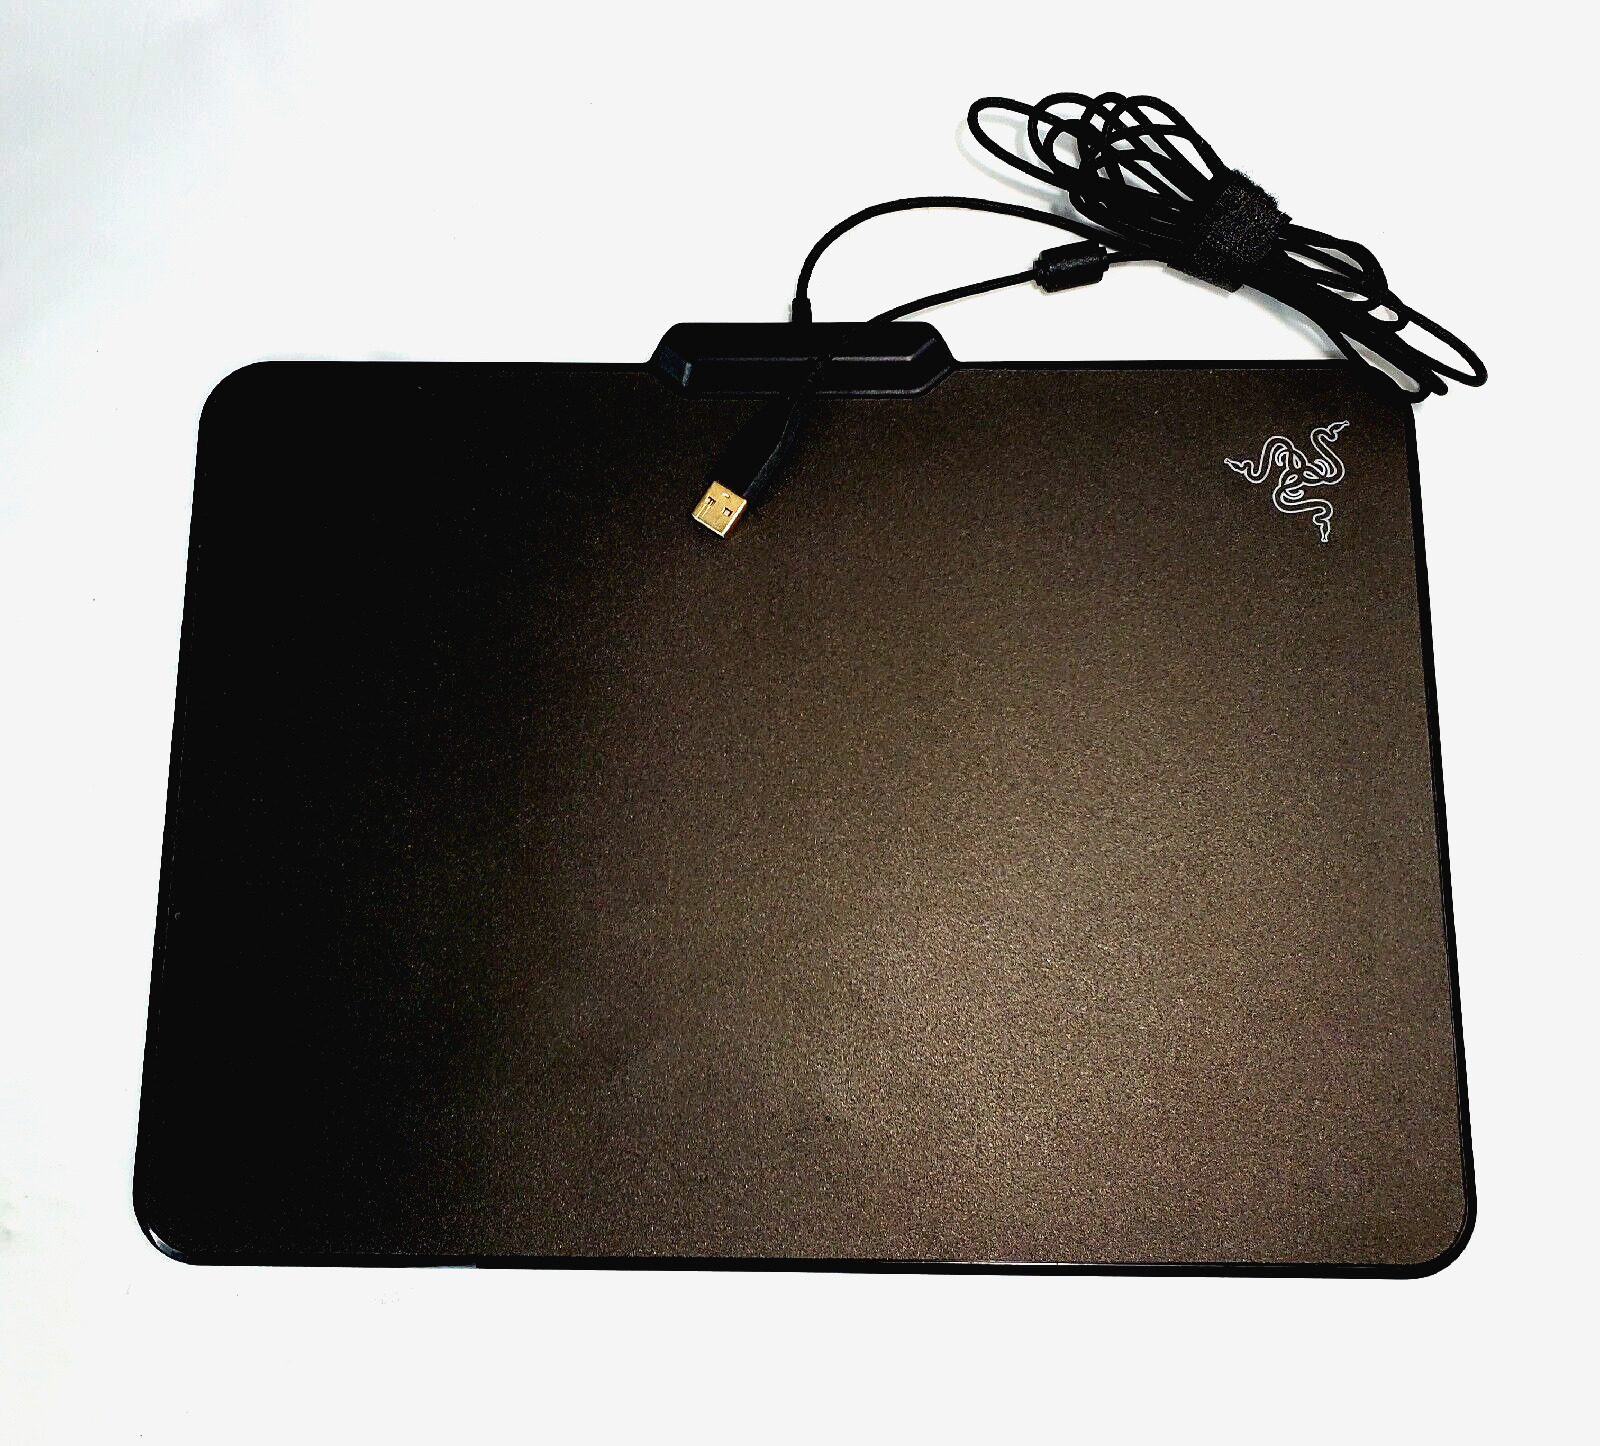 Razer Fire Fly Gaming Mouse Mat Black  Built in USB Cord RZ020135 Multi Lighted